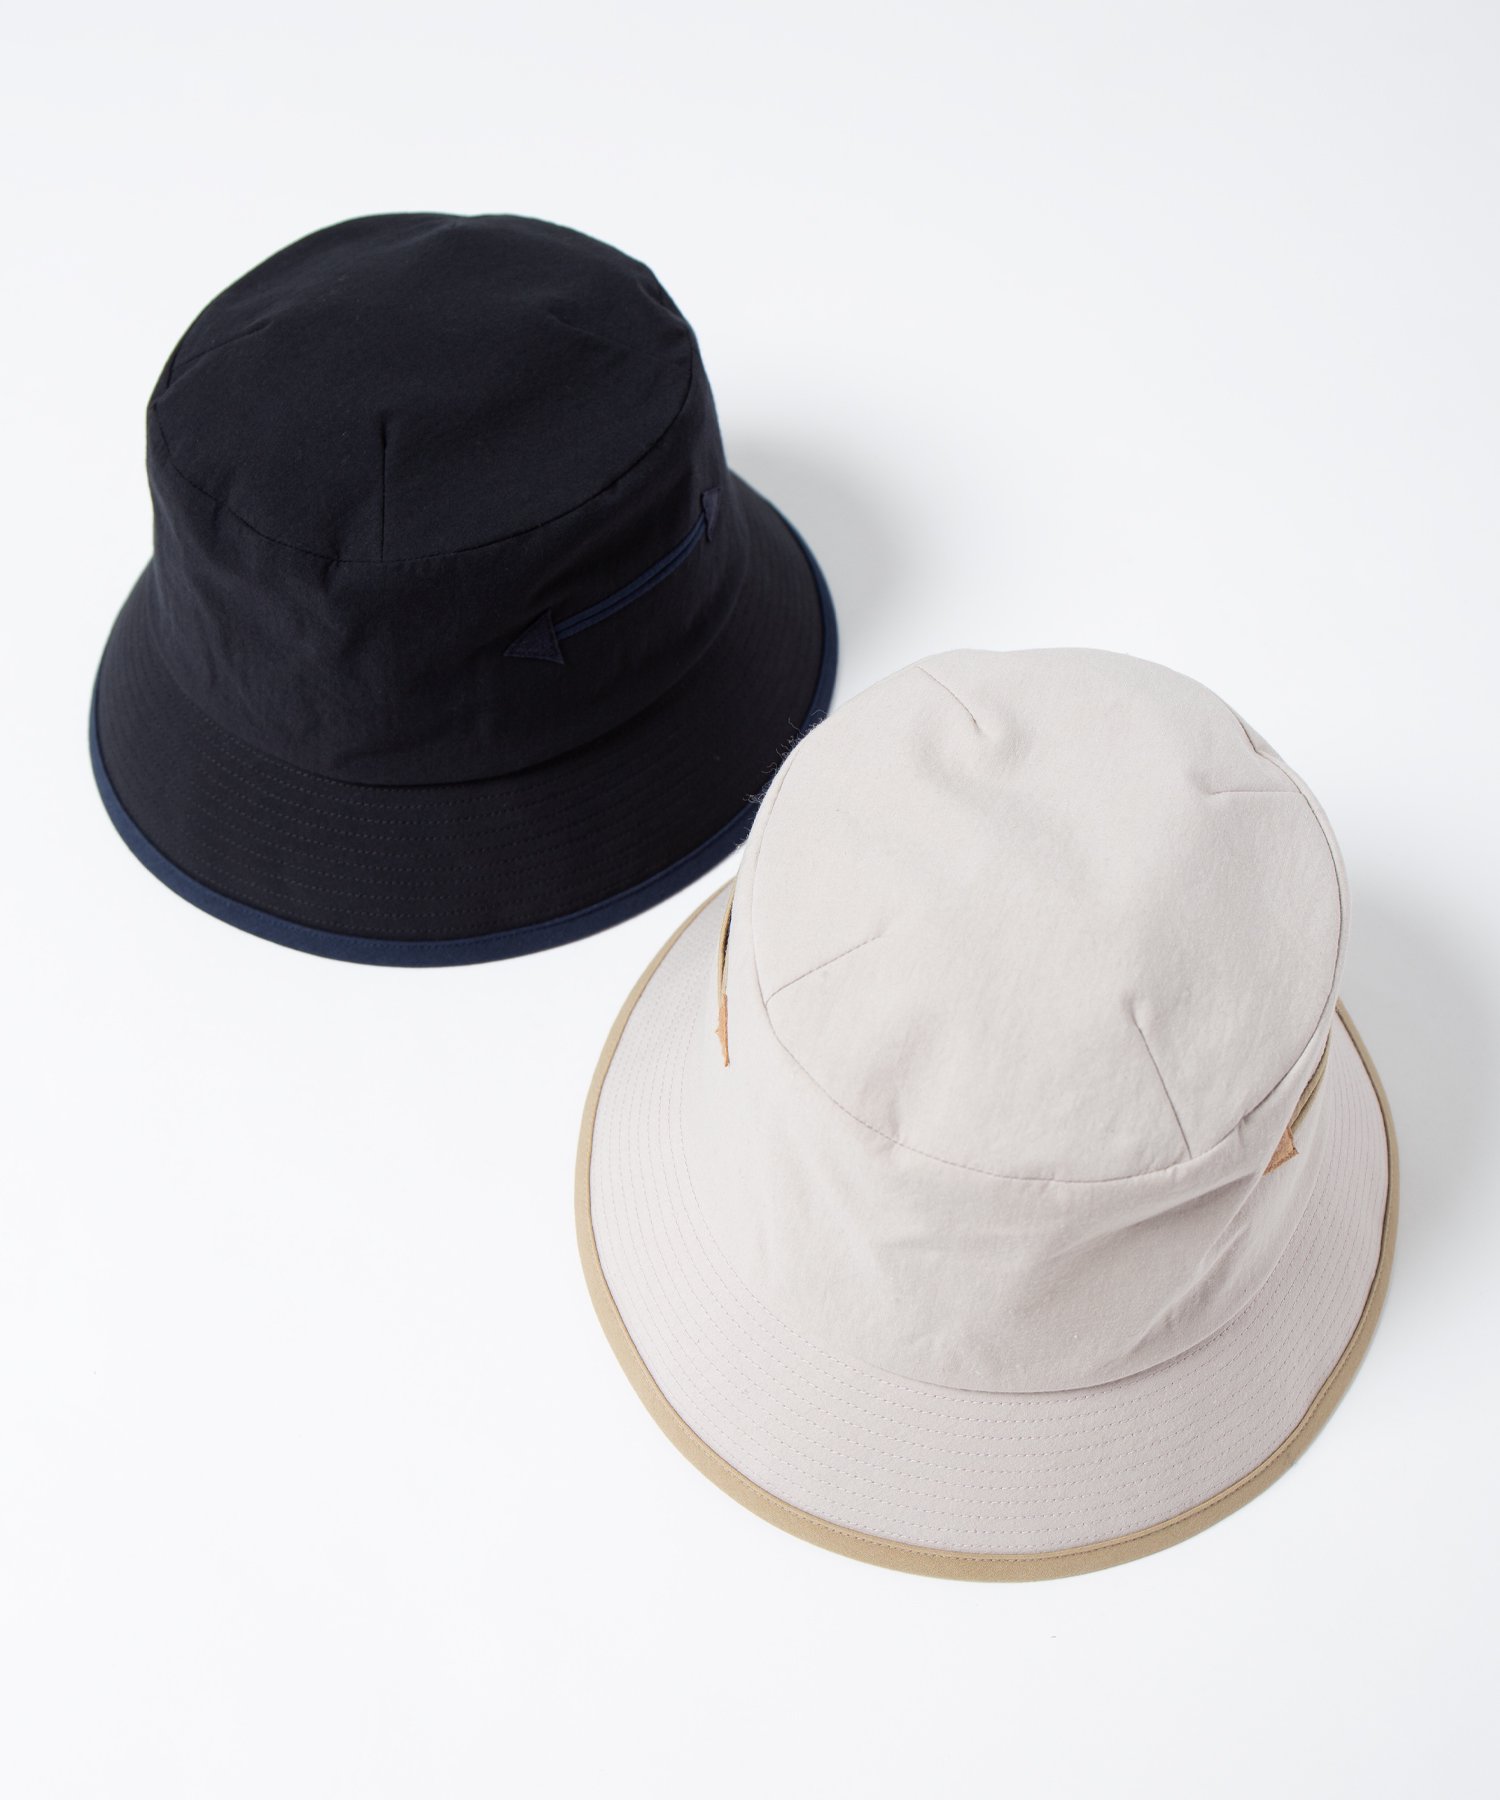 <img class='new_mark_img1' src='https://img.shop-pro.jp/img/new/icons20.gif' style='border:none;display:inline;margin:0px;padding:0px;width:auto;' />Indietro Association Pocket Bucket Hat 053 8パネルポケットバケットハット